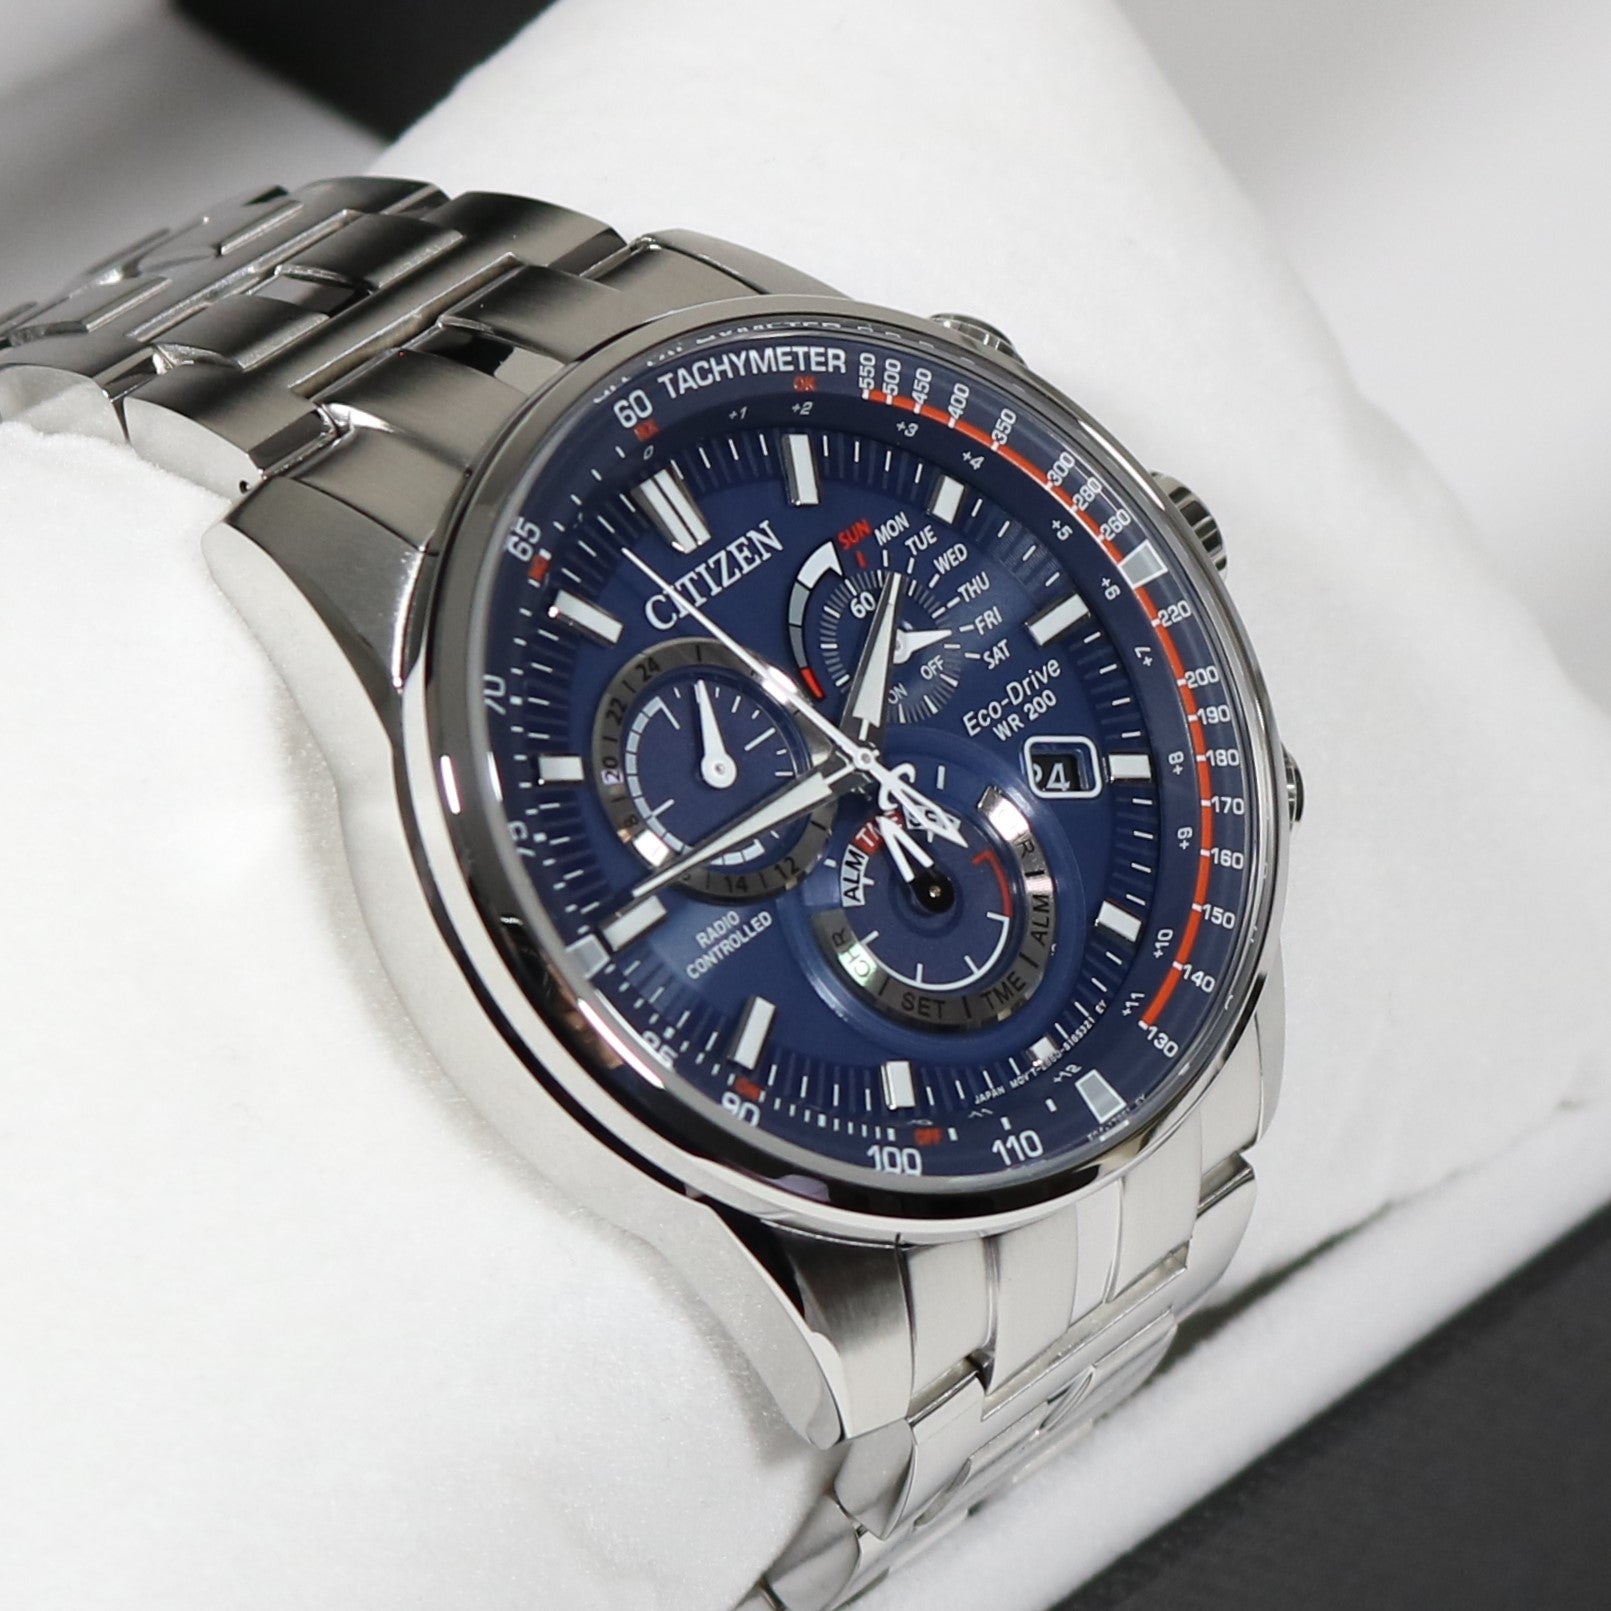 Chronobuy – PCAT CB5880-5 Citizen Eco-Drive Watch Dial Blue Chronograph Controlled